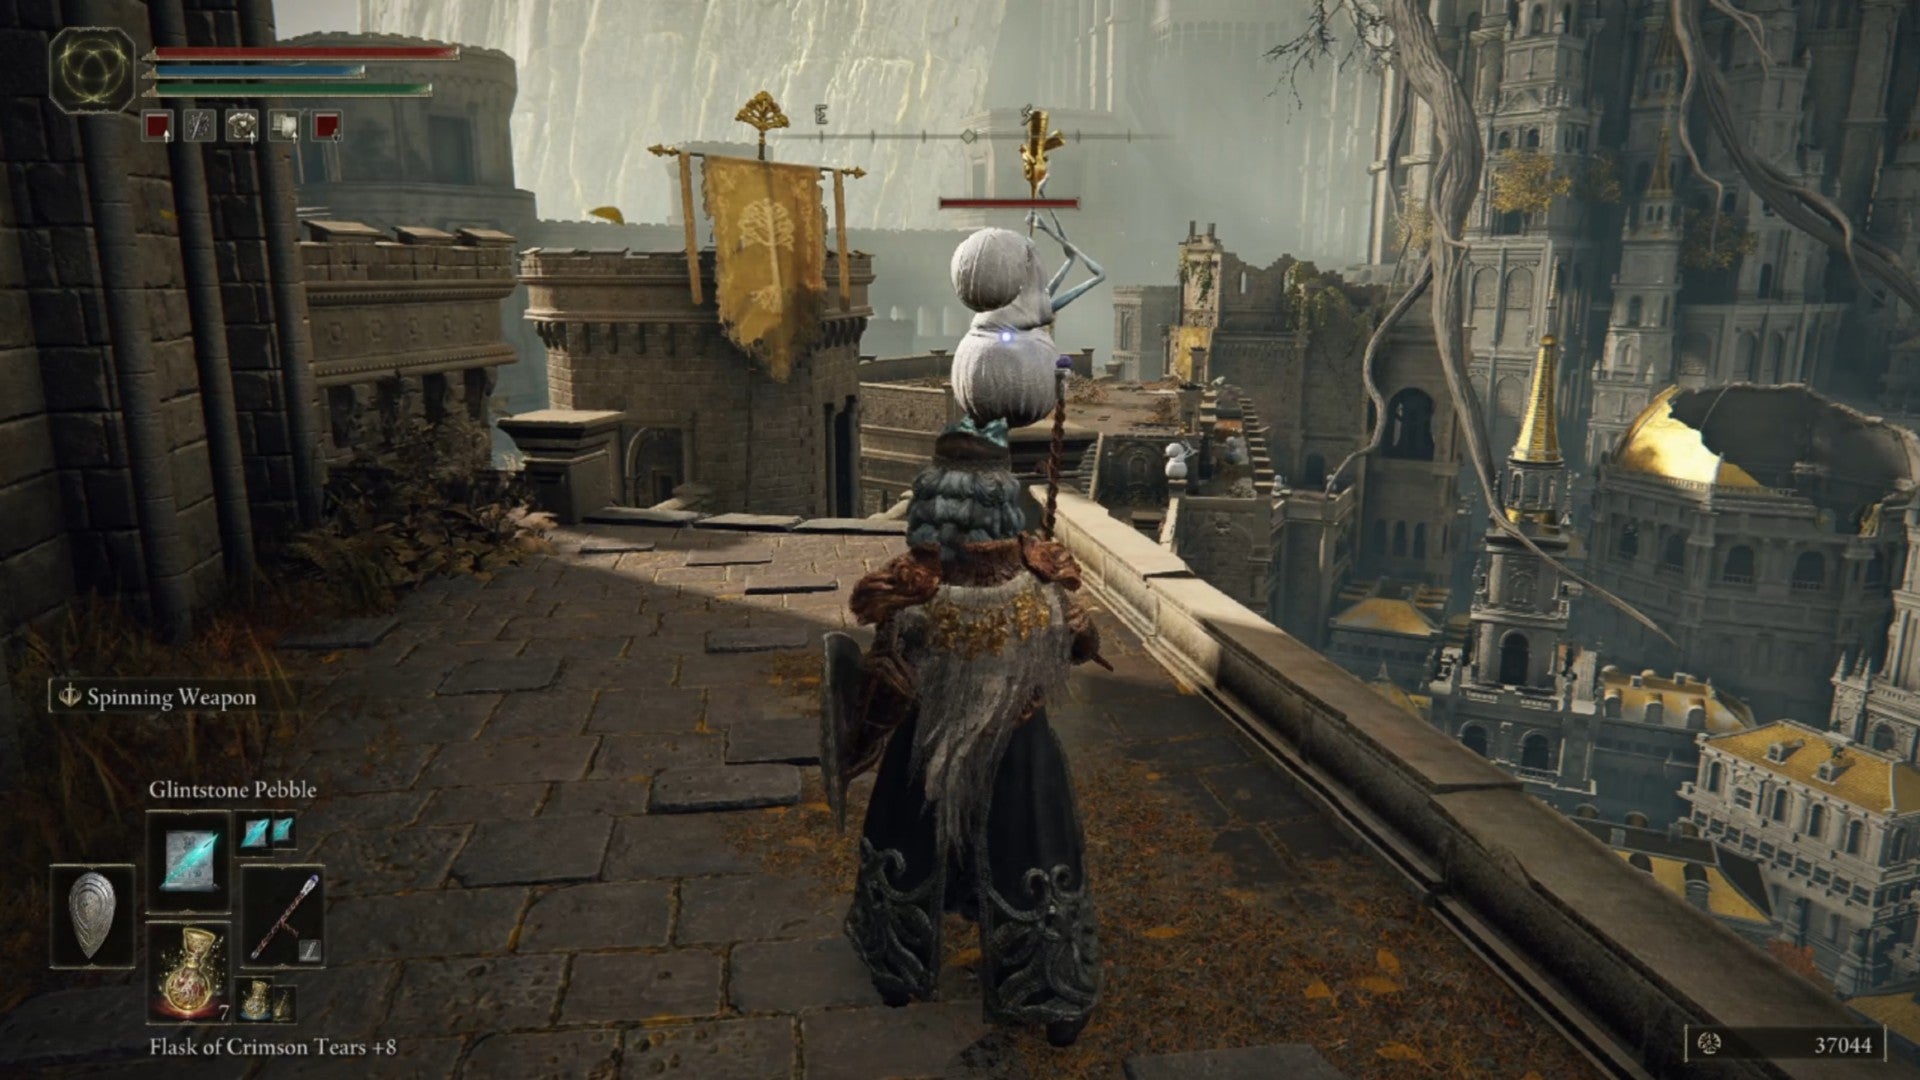 Elden Ring player stands on a walkway overlooking a ruined city. They aim at an enemy that looks like a snowman playing a trumpet.